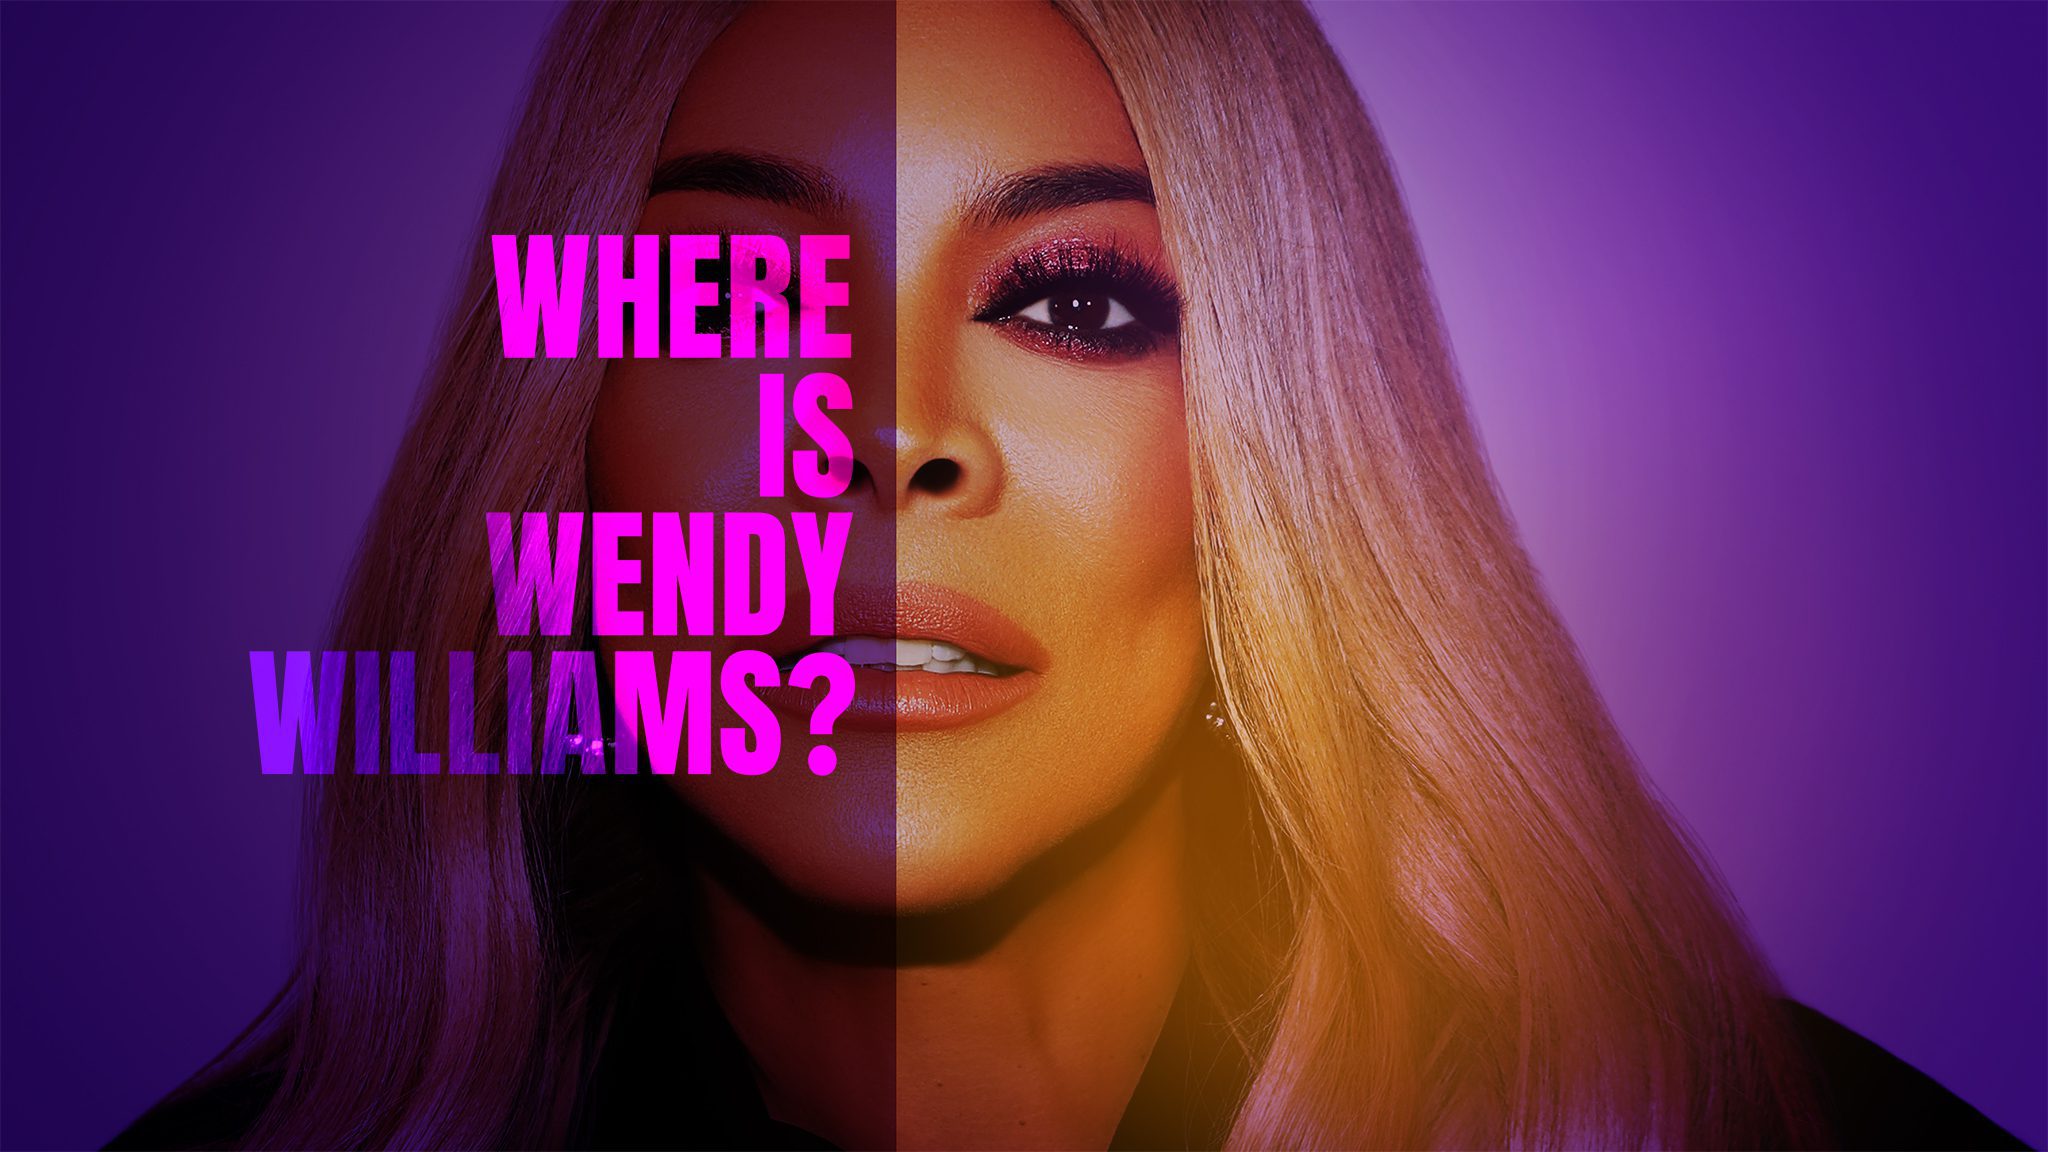 where-is-wendy-williams-2048x1152-promo-16x9-1